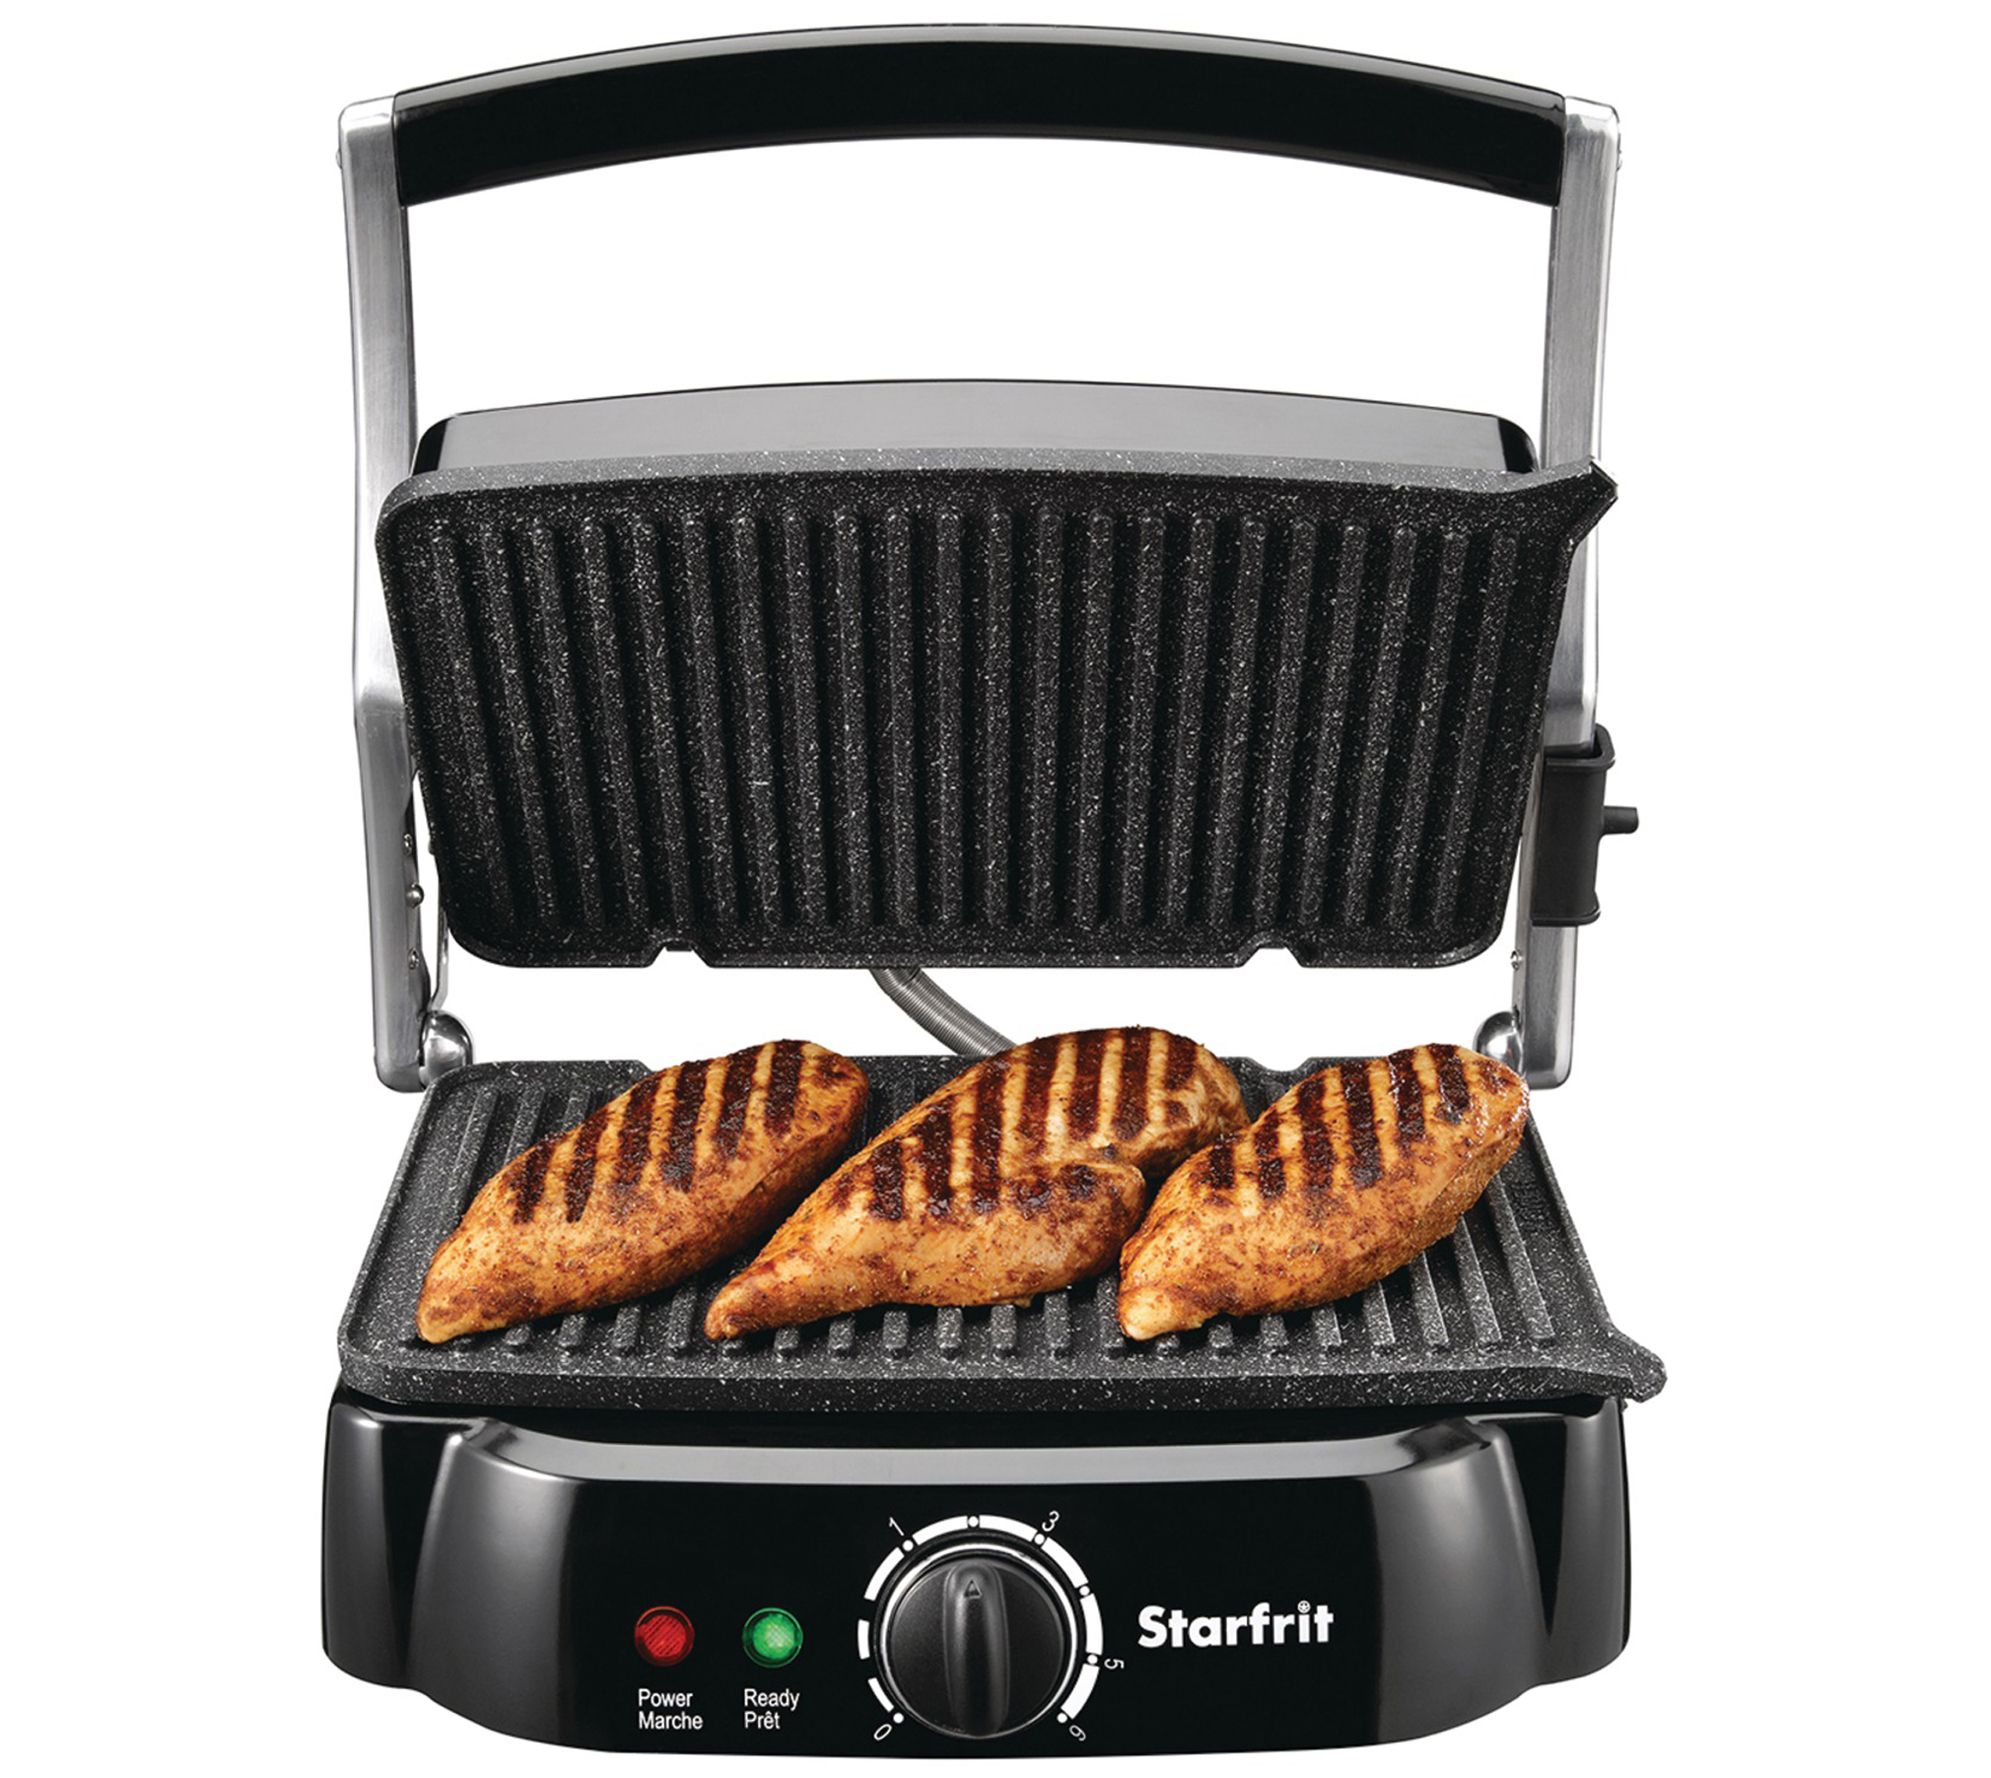 Starfrit The Rock Indoor Smokeless Electric Bbq Grill